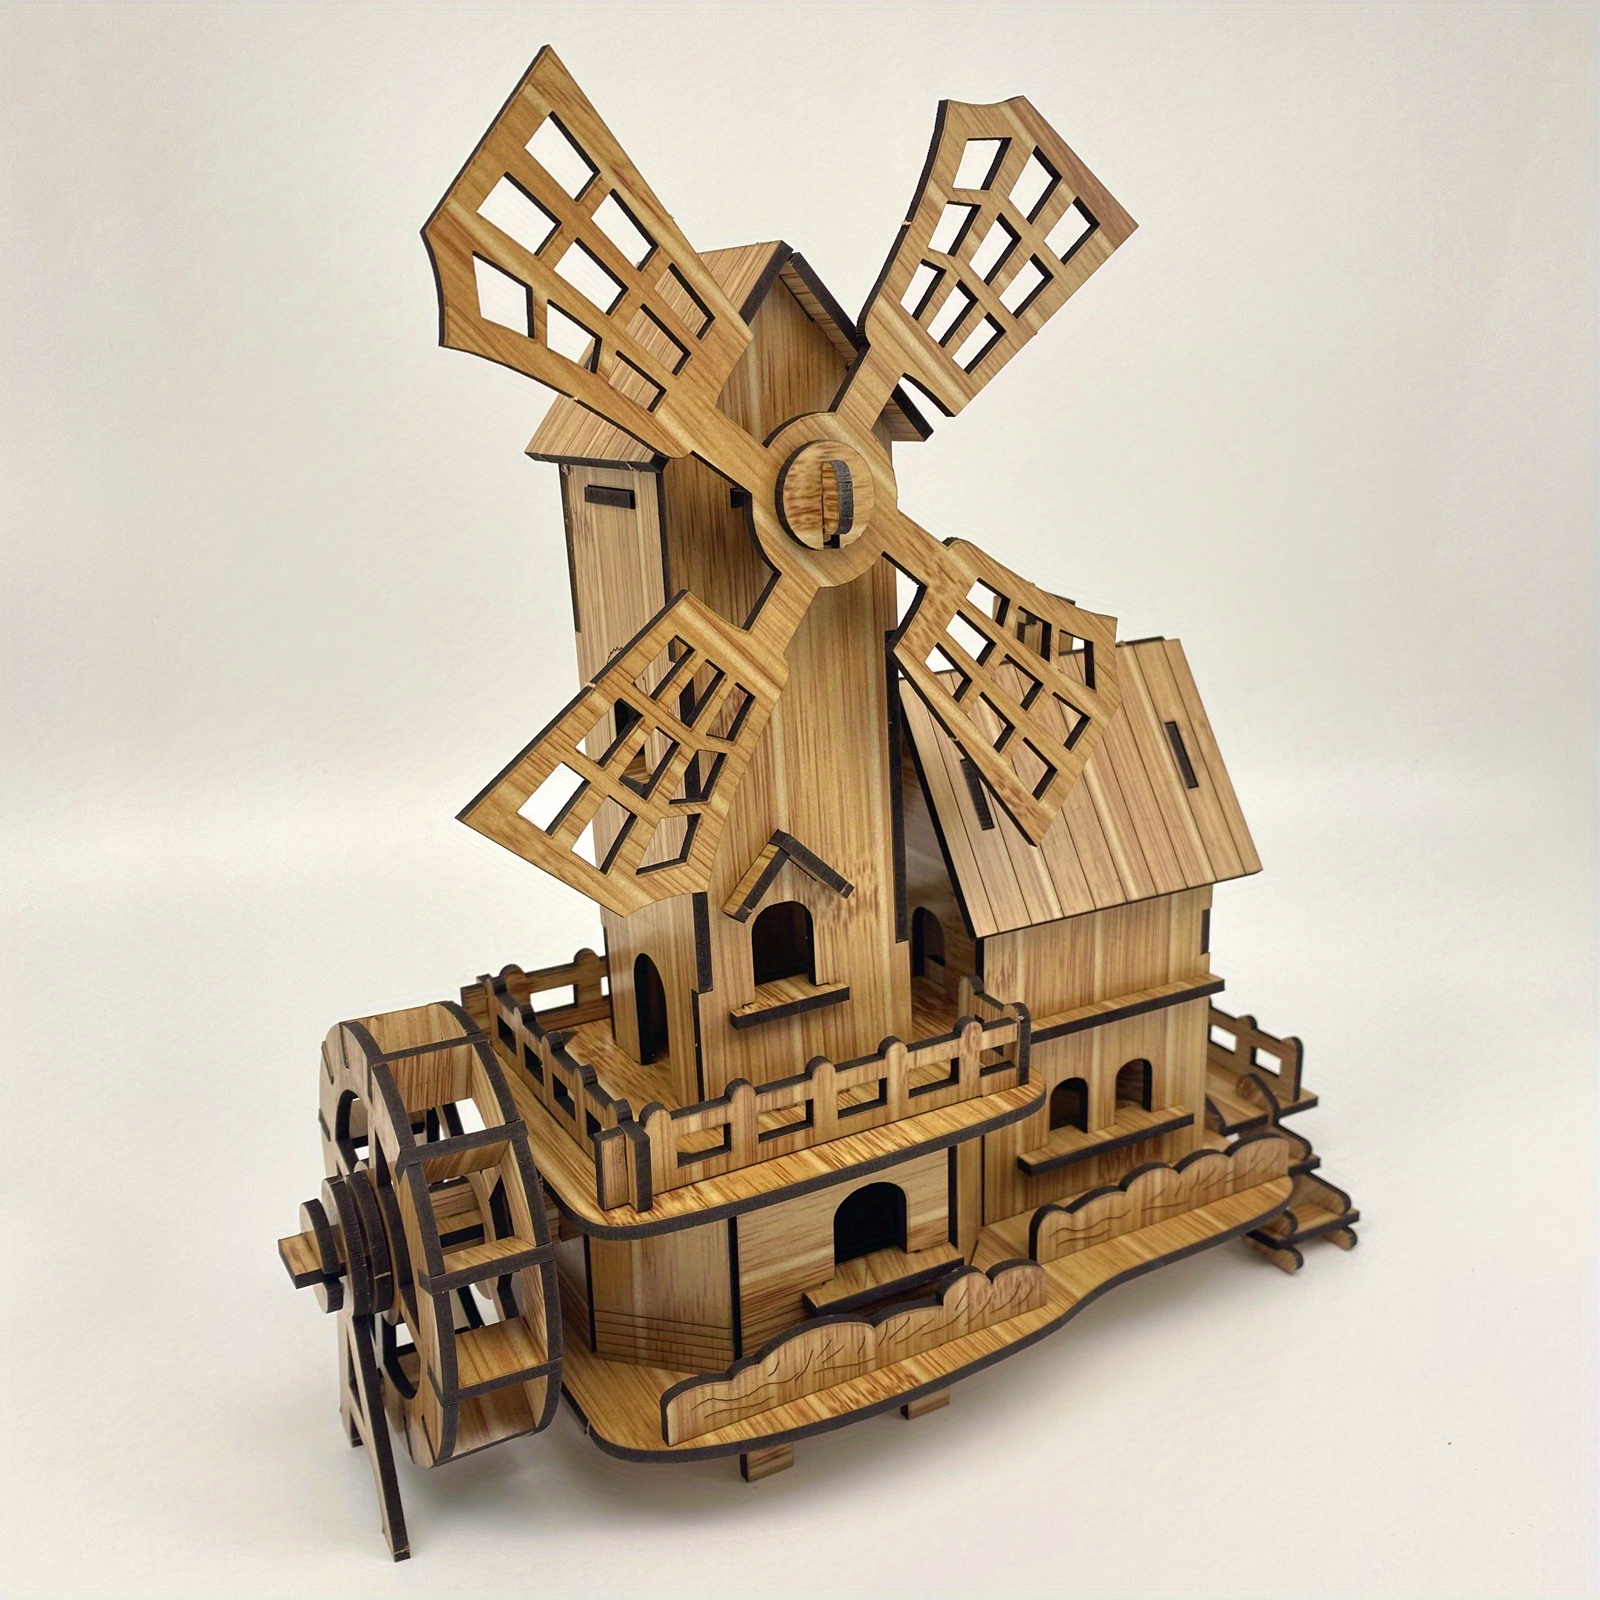 Wooden Jigsaw Puzzle Impuzzle Toy Factory Laser cut